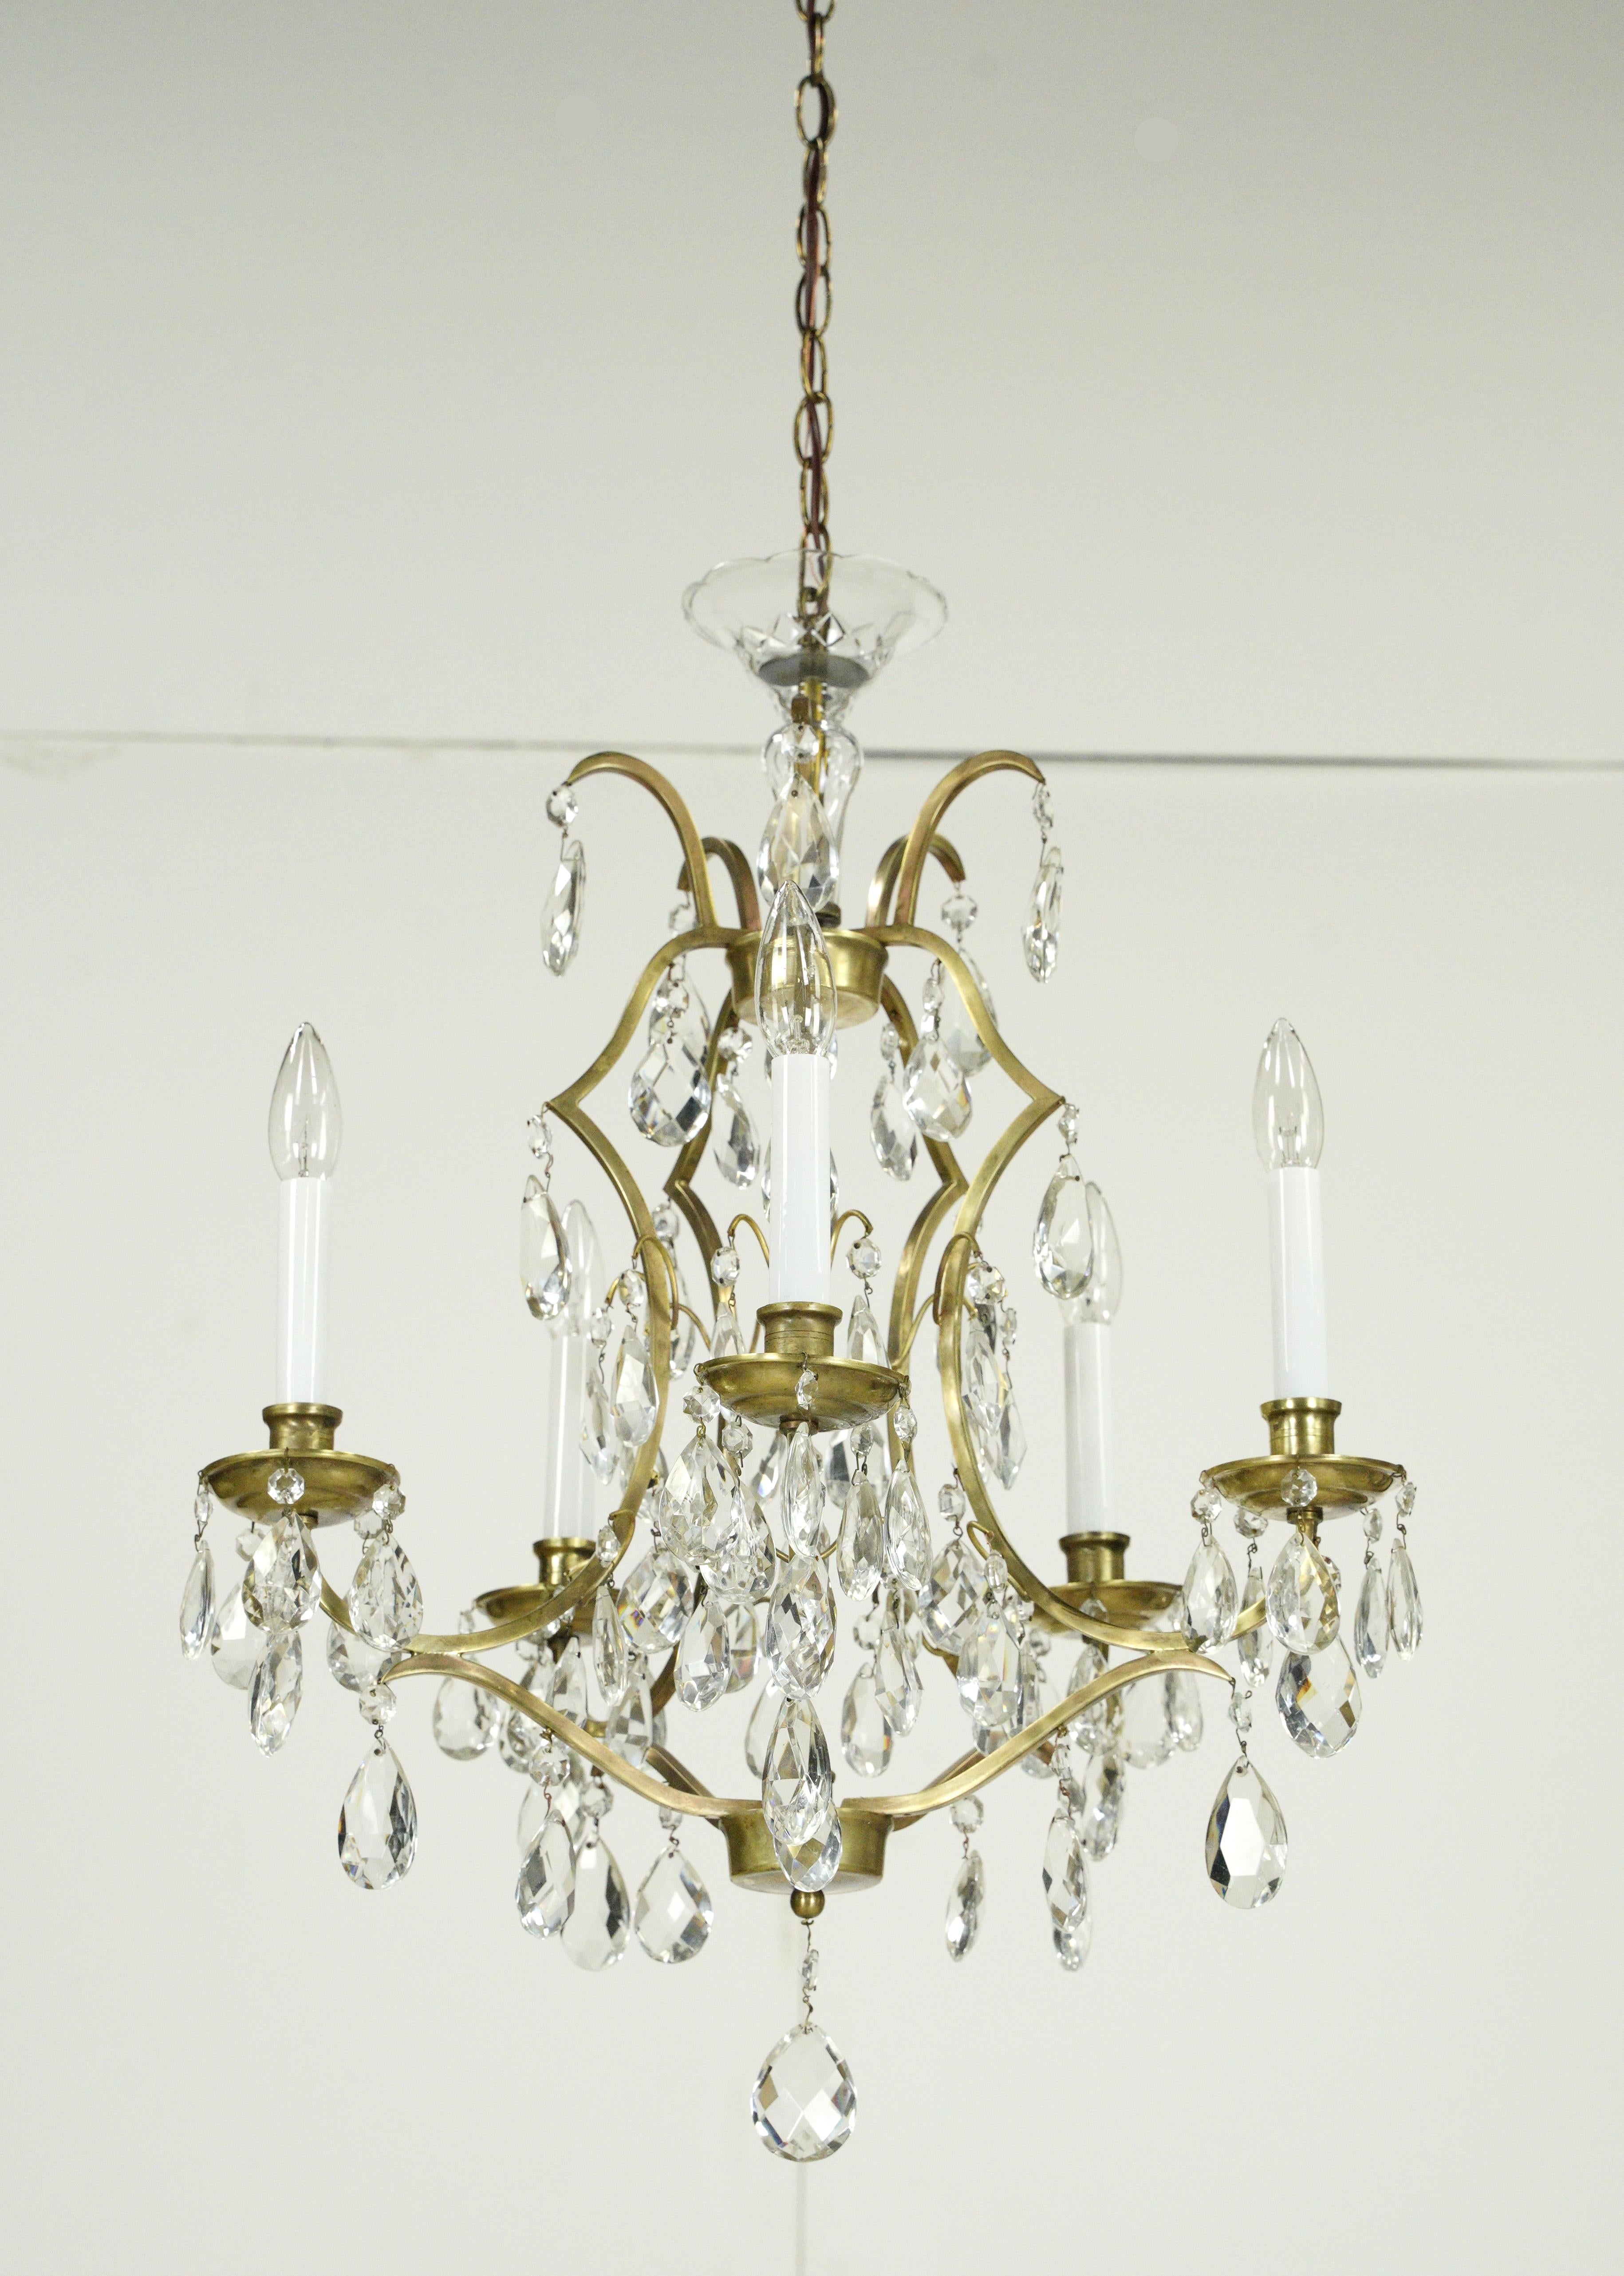 Waldorf Astoria Hotel 5 Arm Crystal & Brass Chandelier In Good Condition For Sale In New York, NY